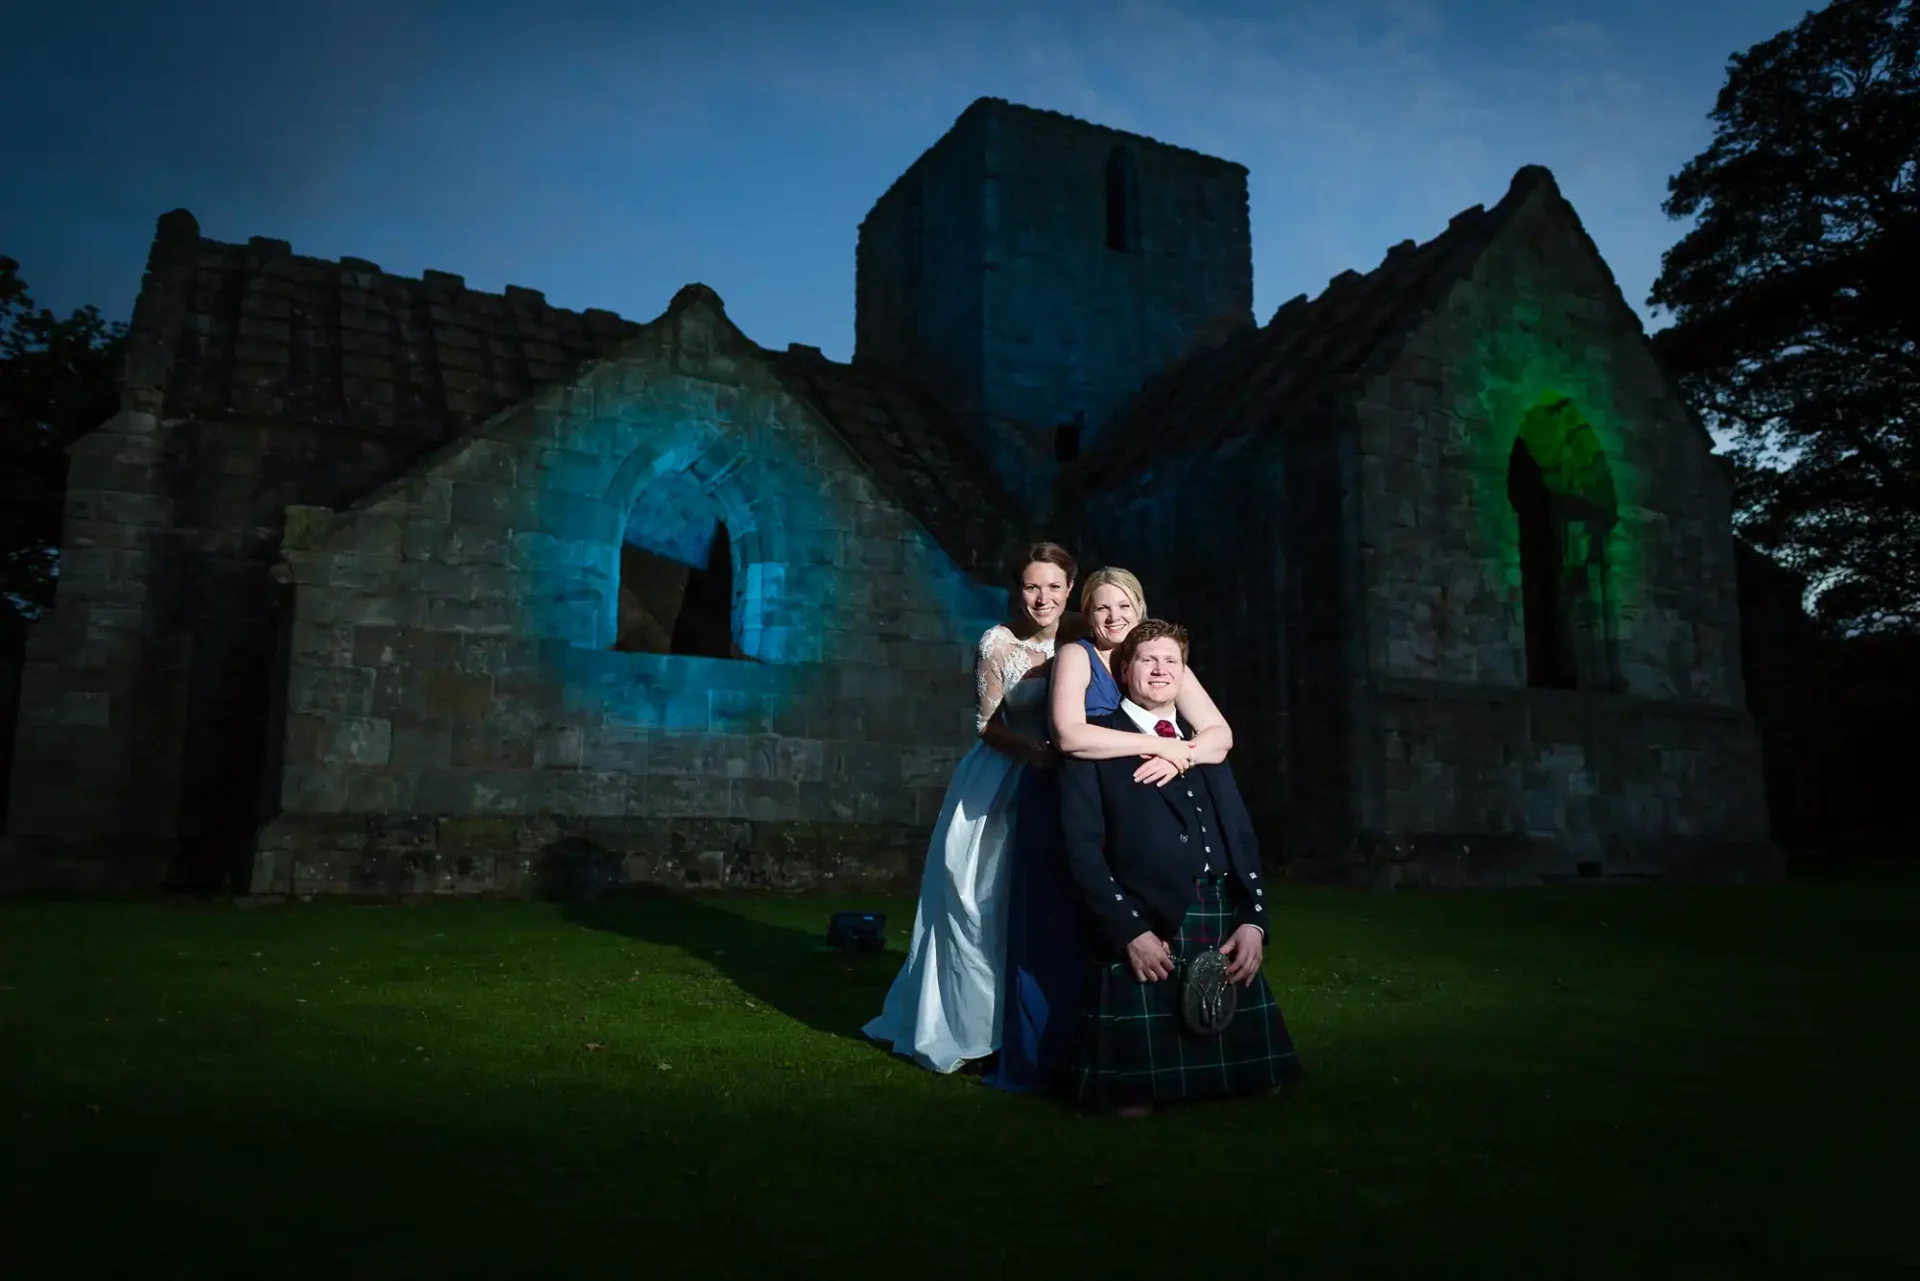 A bride and groom posing at night in front of an old stone church illuminated with blue and green lights.